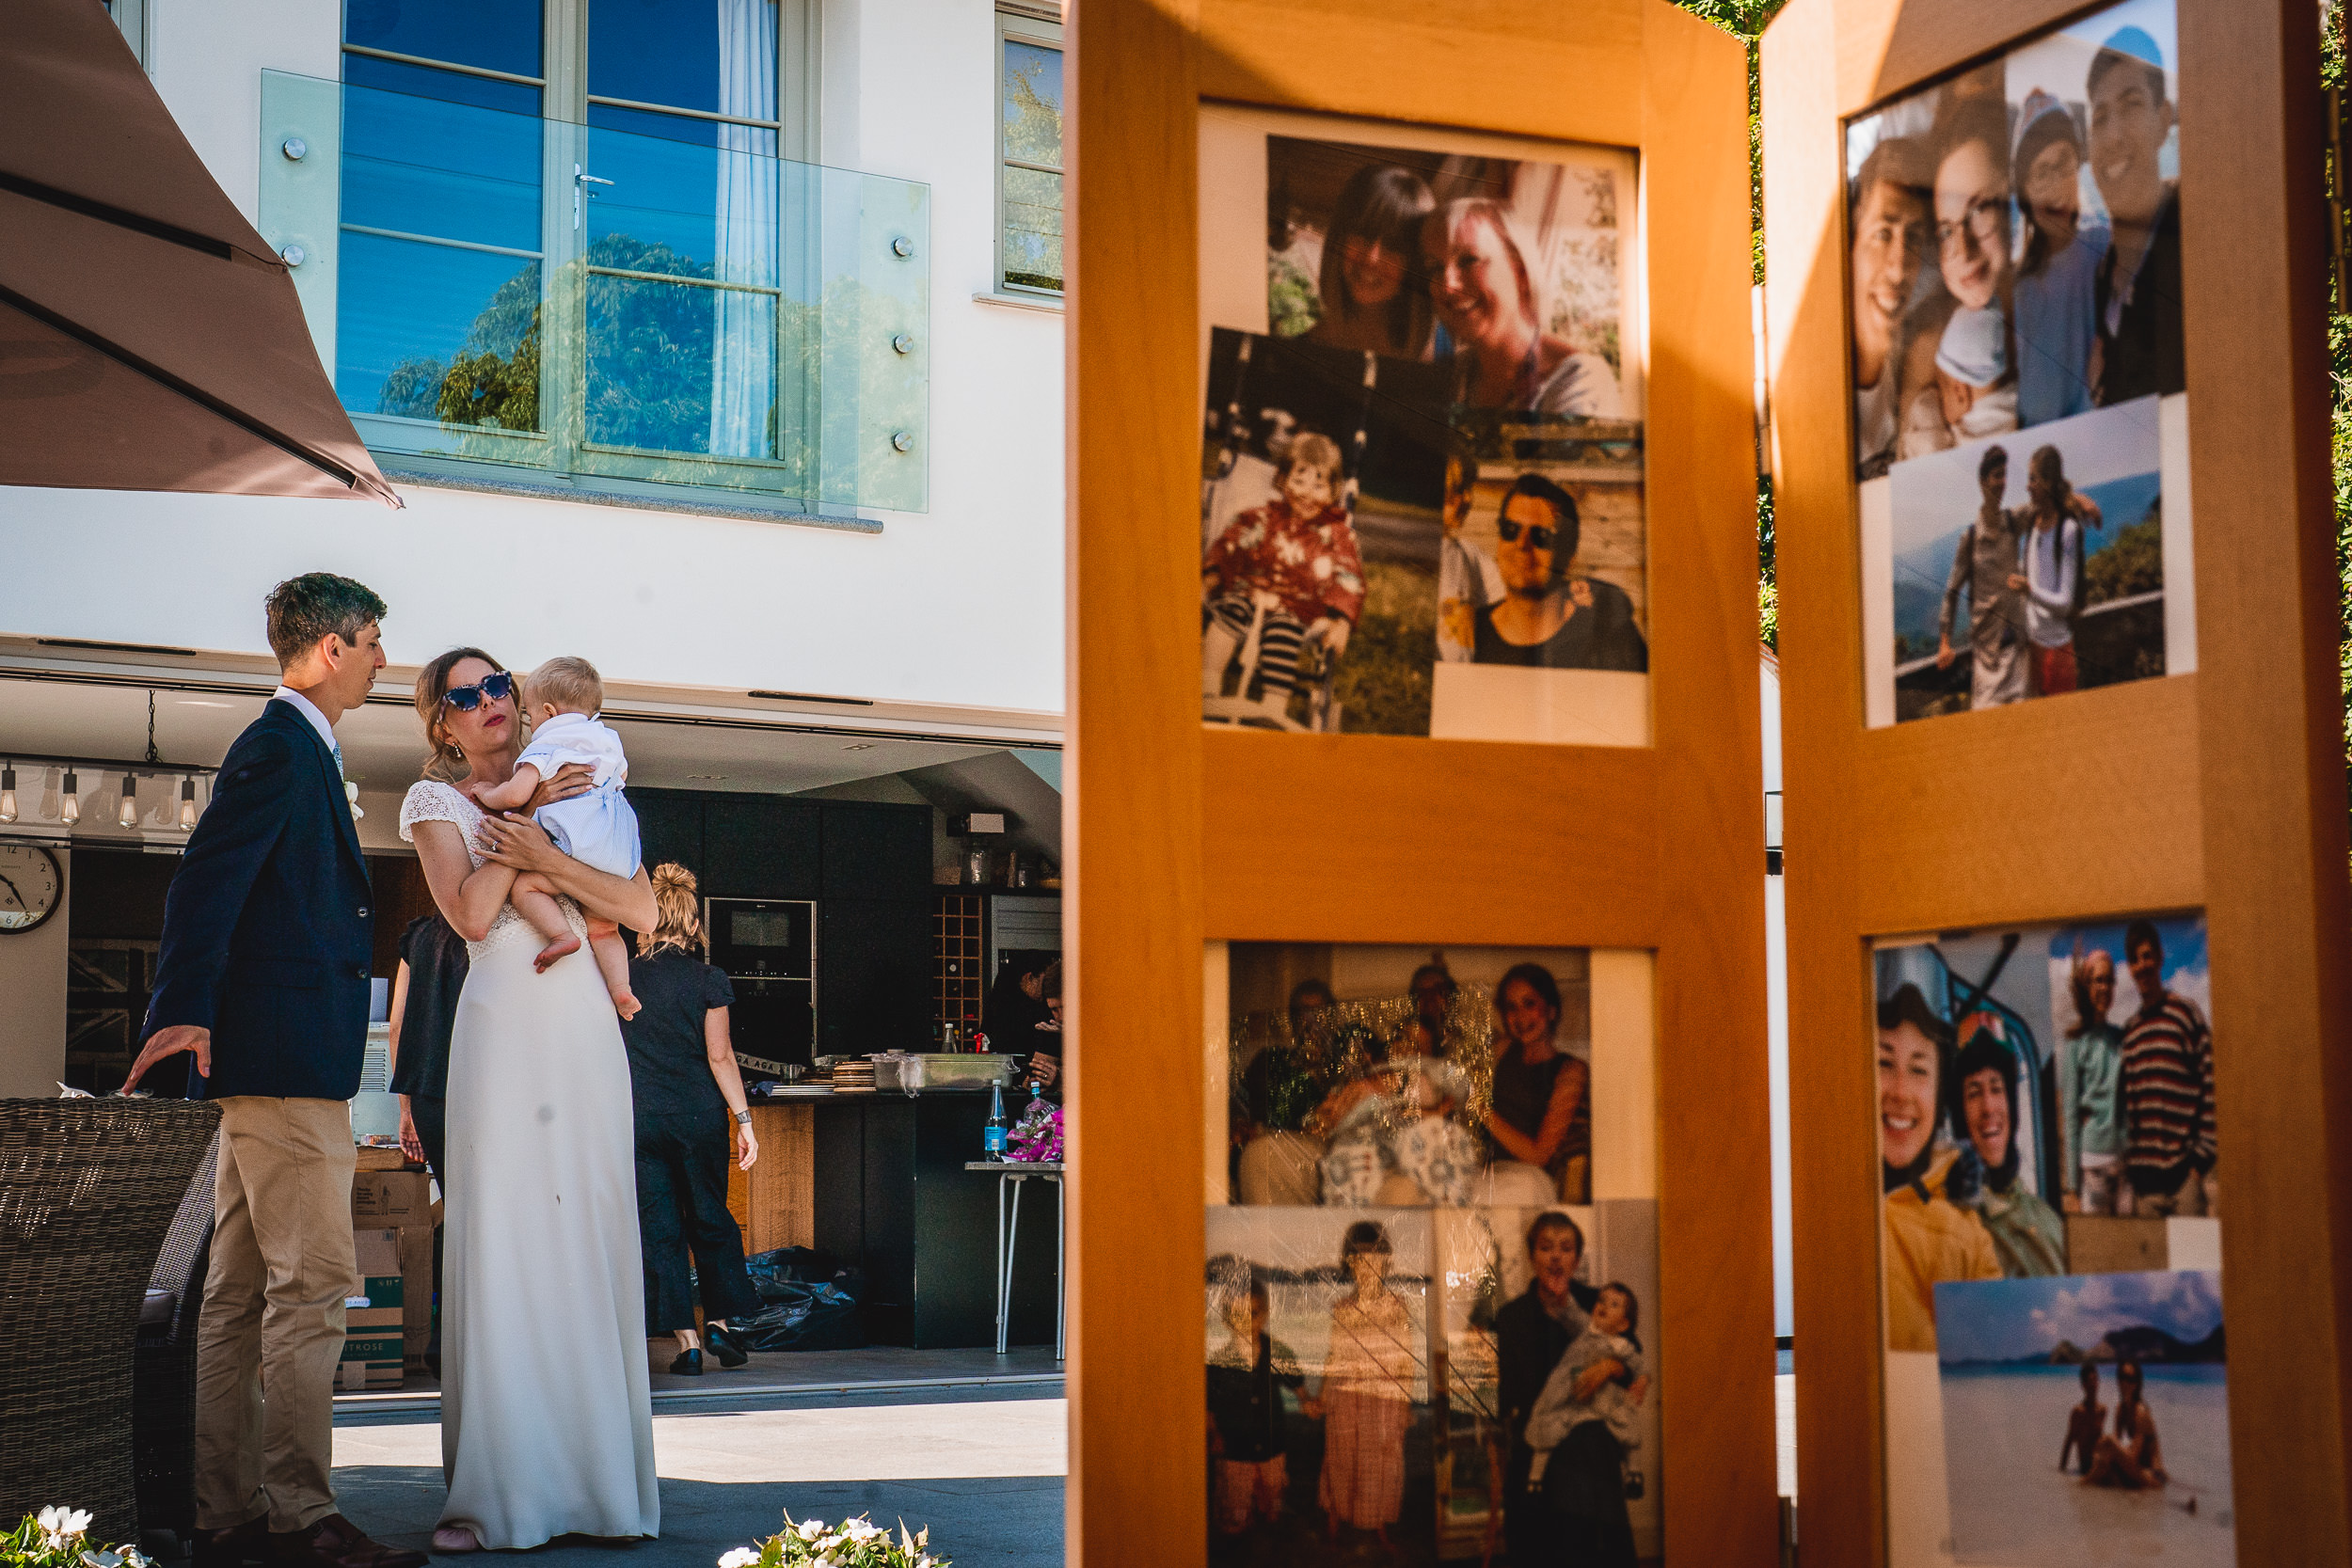 A bride, wedding photographer, and wedding party pose in front of a wooden frame adorned with pictures.